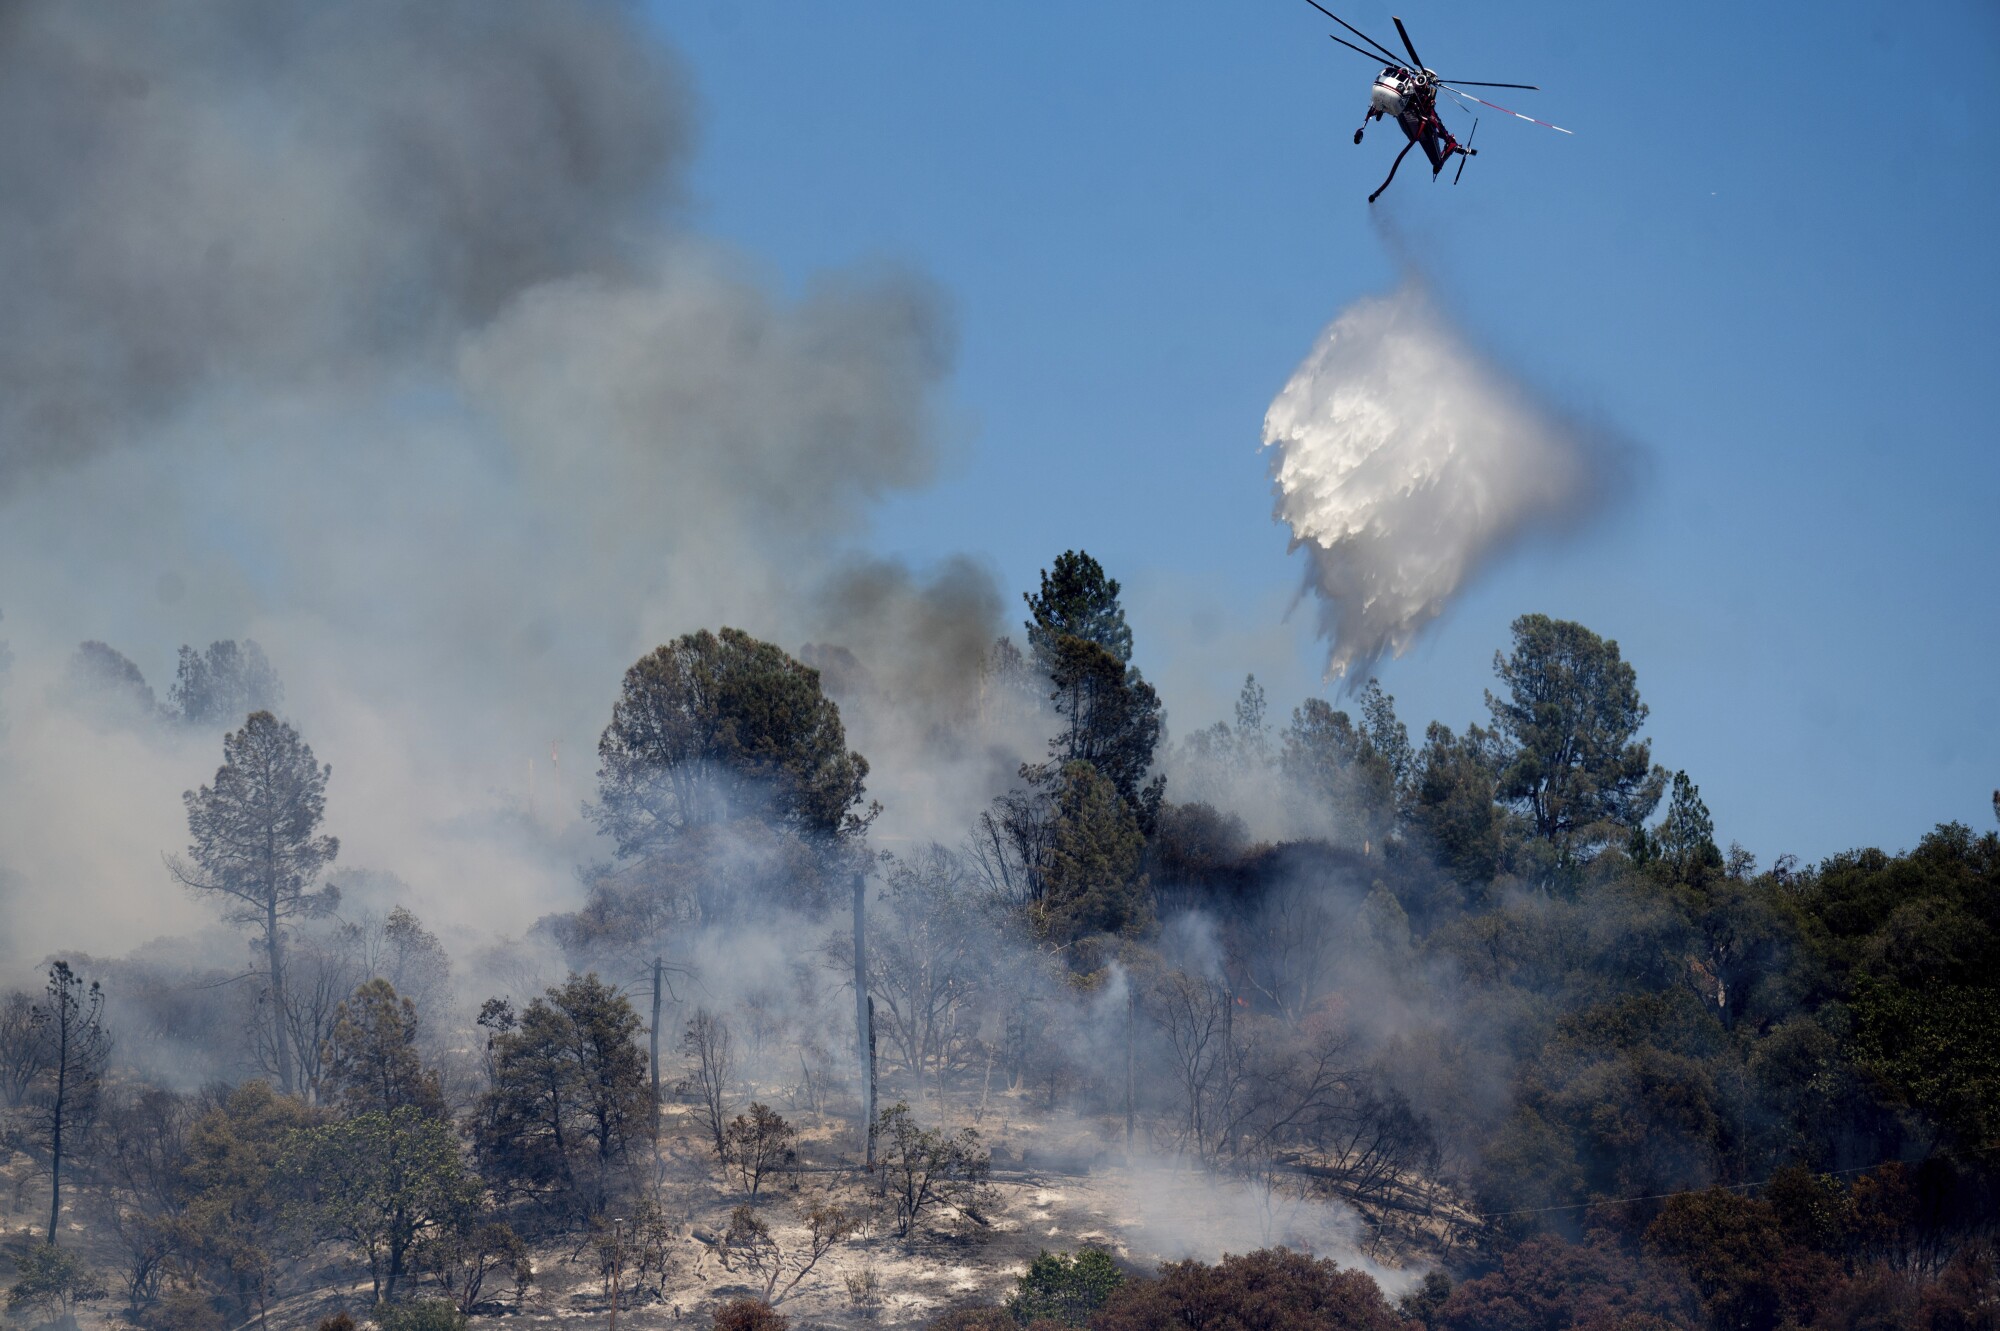 A helicopter drops water on a forest fire.